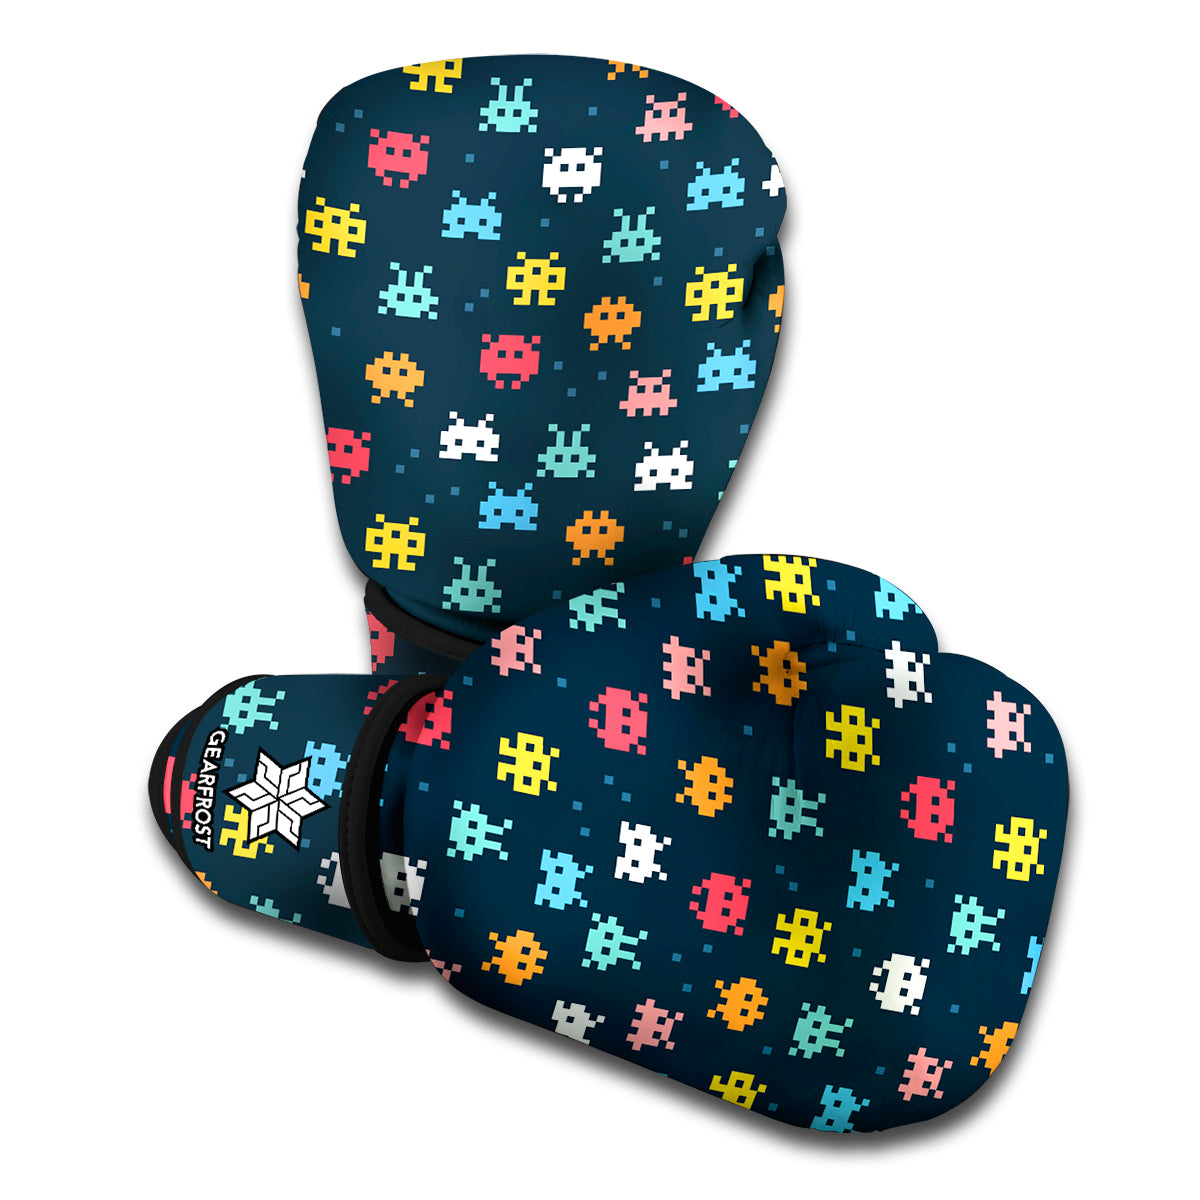 8-Bit Video Game Monsters Pattern Print Boxing Gloves